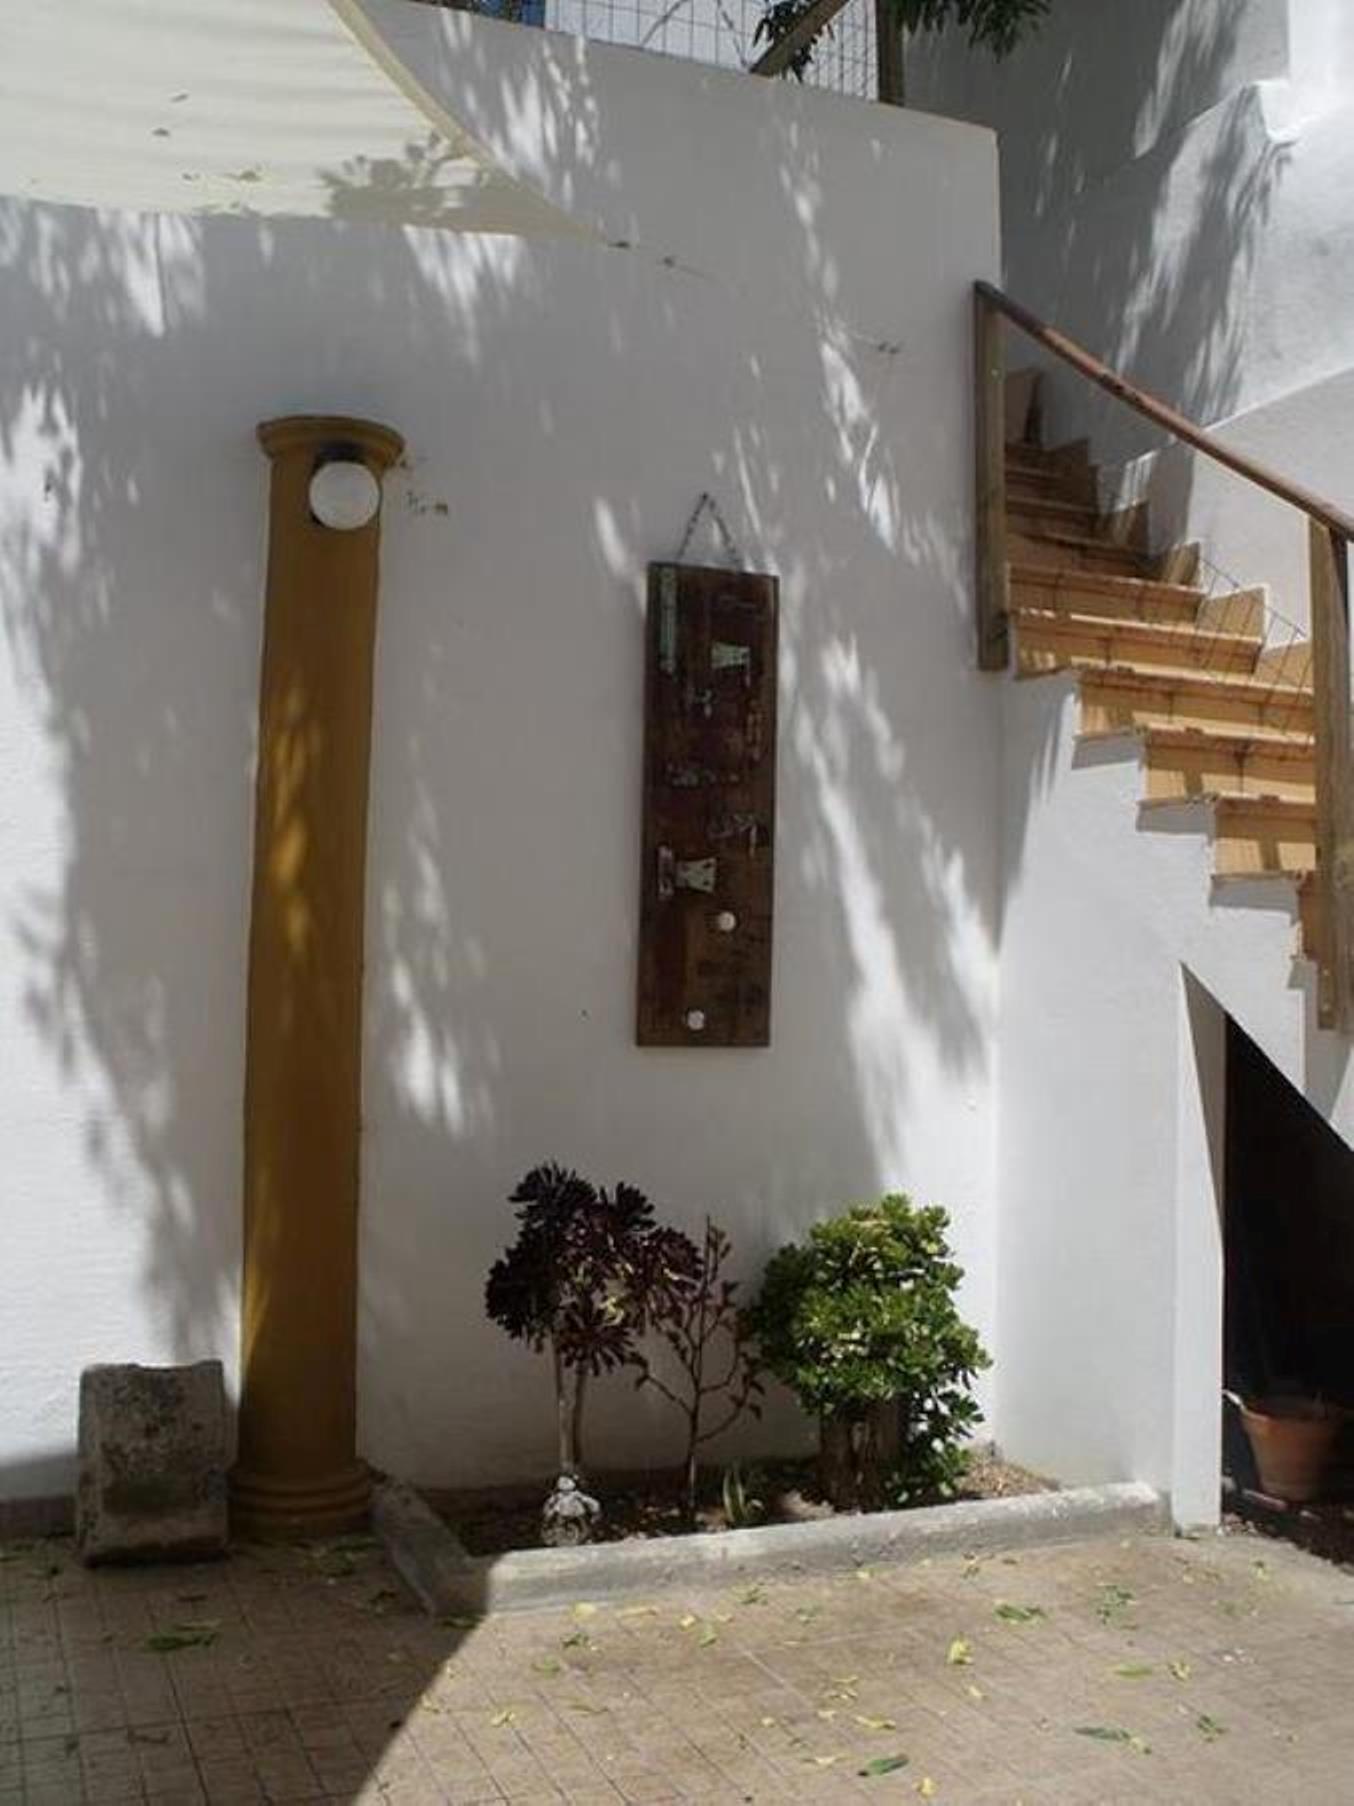 2 bedroom cottage in heart of charming village to rent